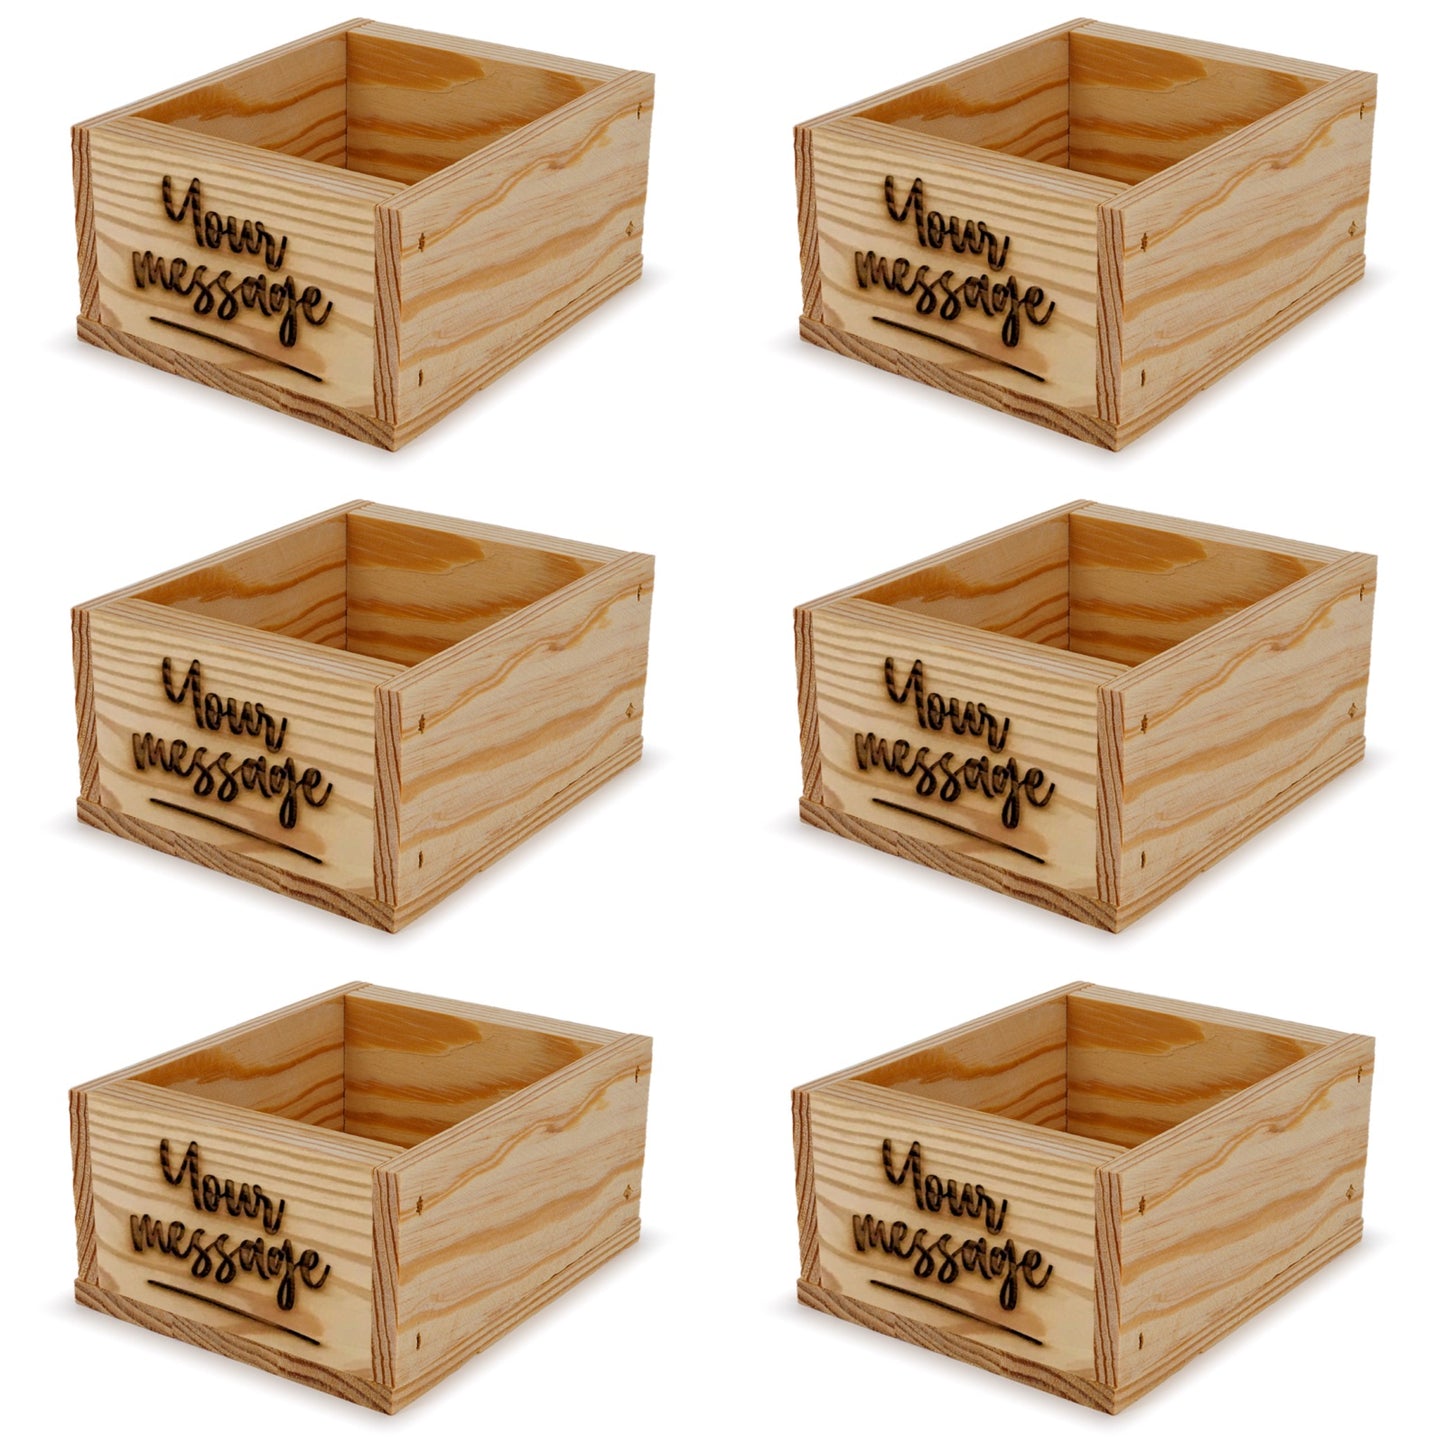 6 Small wooden crates with custom message 5x4.5x2.75